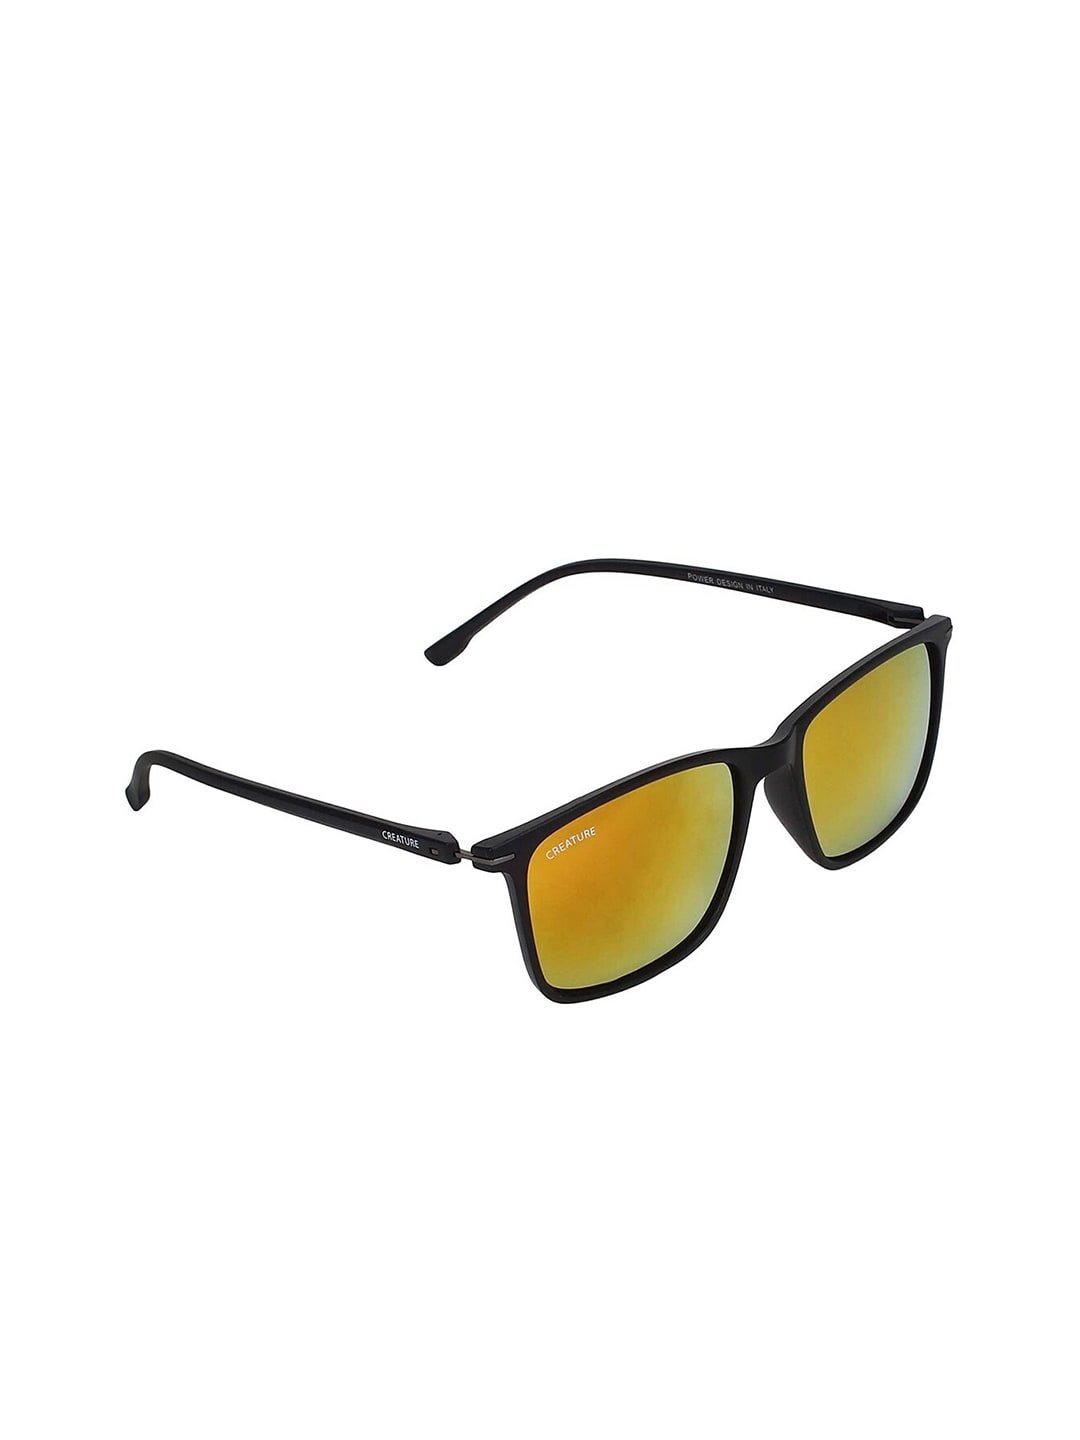 Creature Unisex Yellow Lens & Black Wayfarer Sunglasses with UV Protected Lens PWRS-004 Price in India